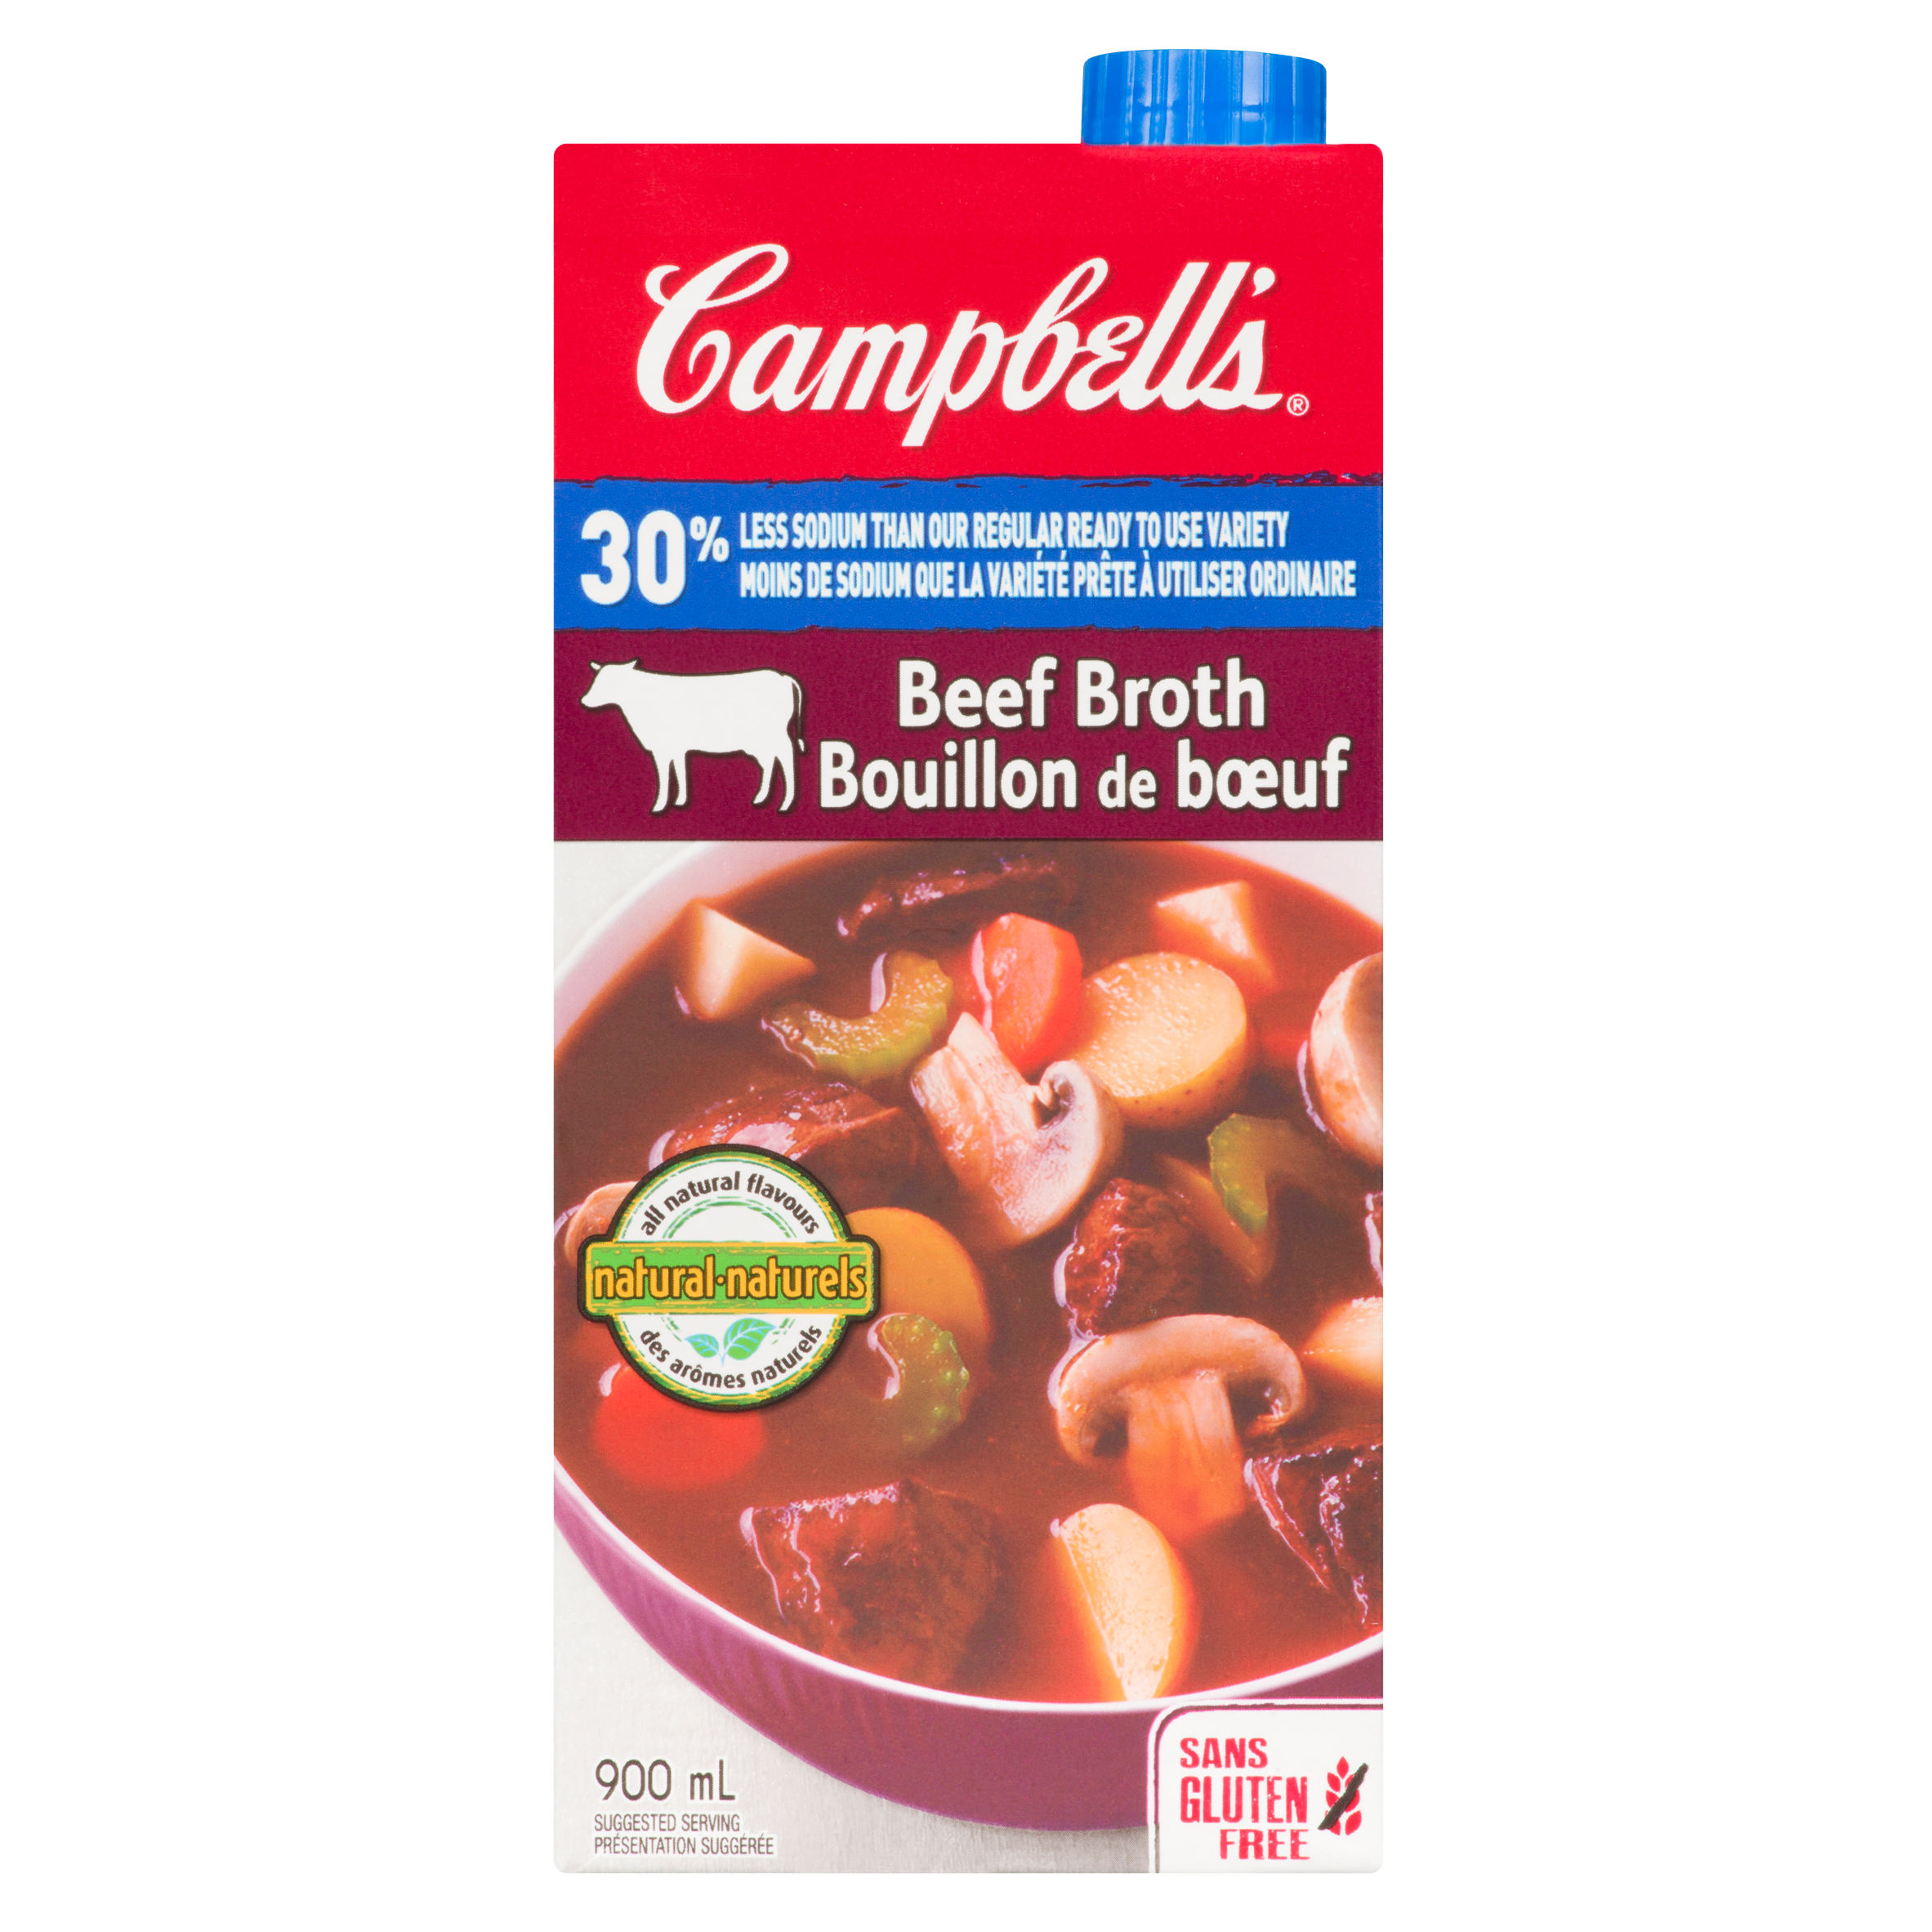 Campbell's Beef Broth 30% LS (900ml)